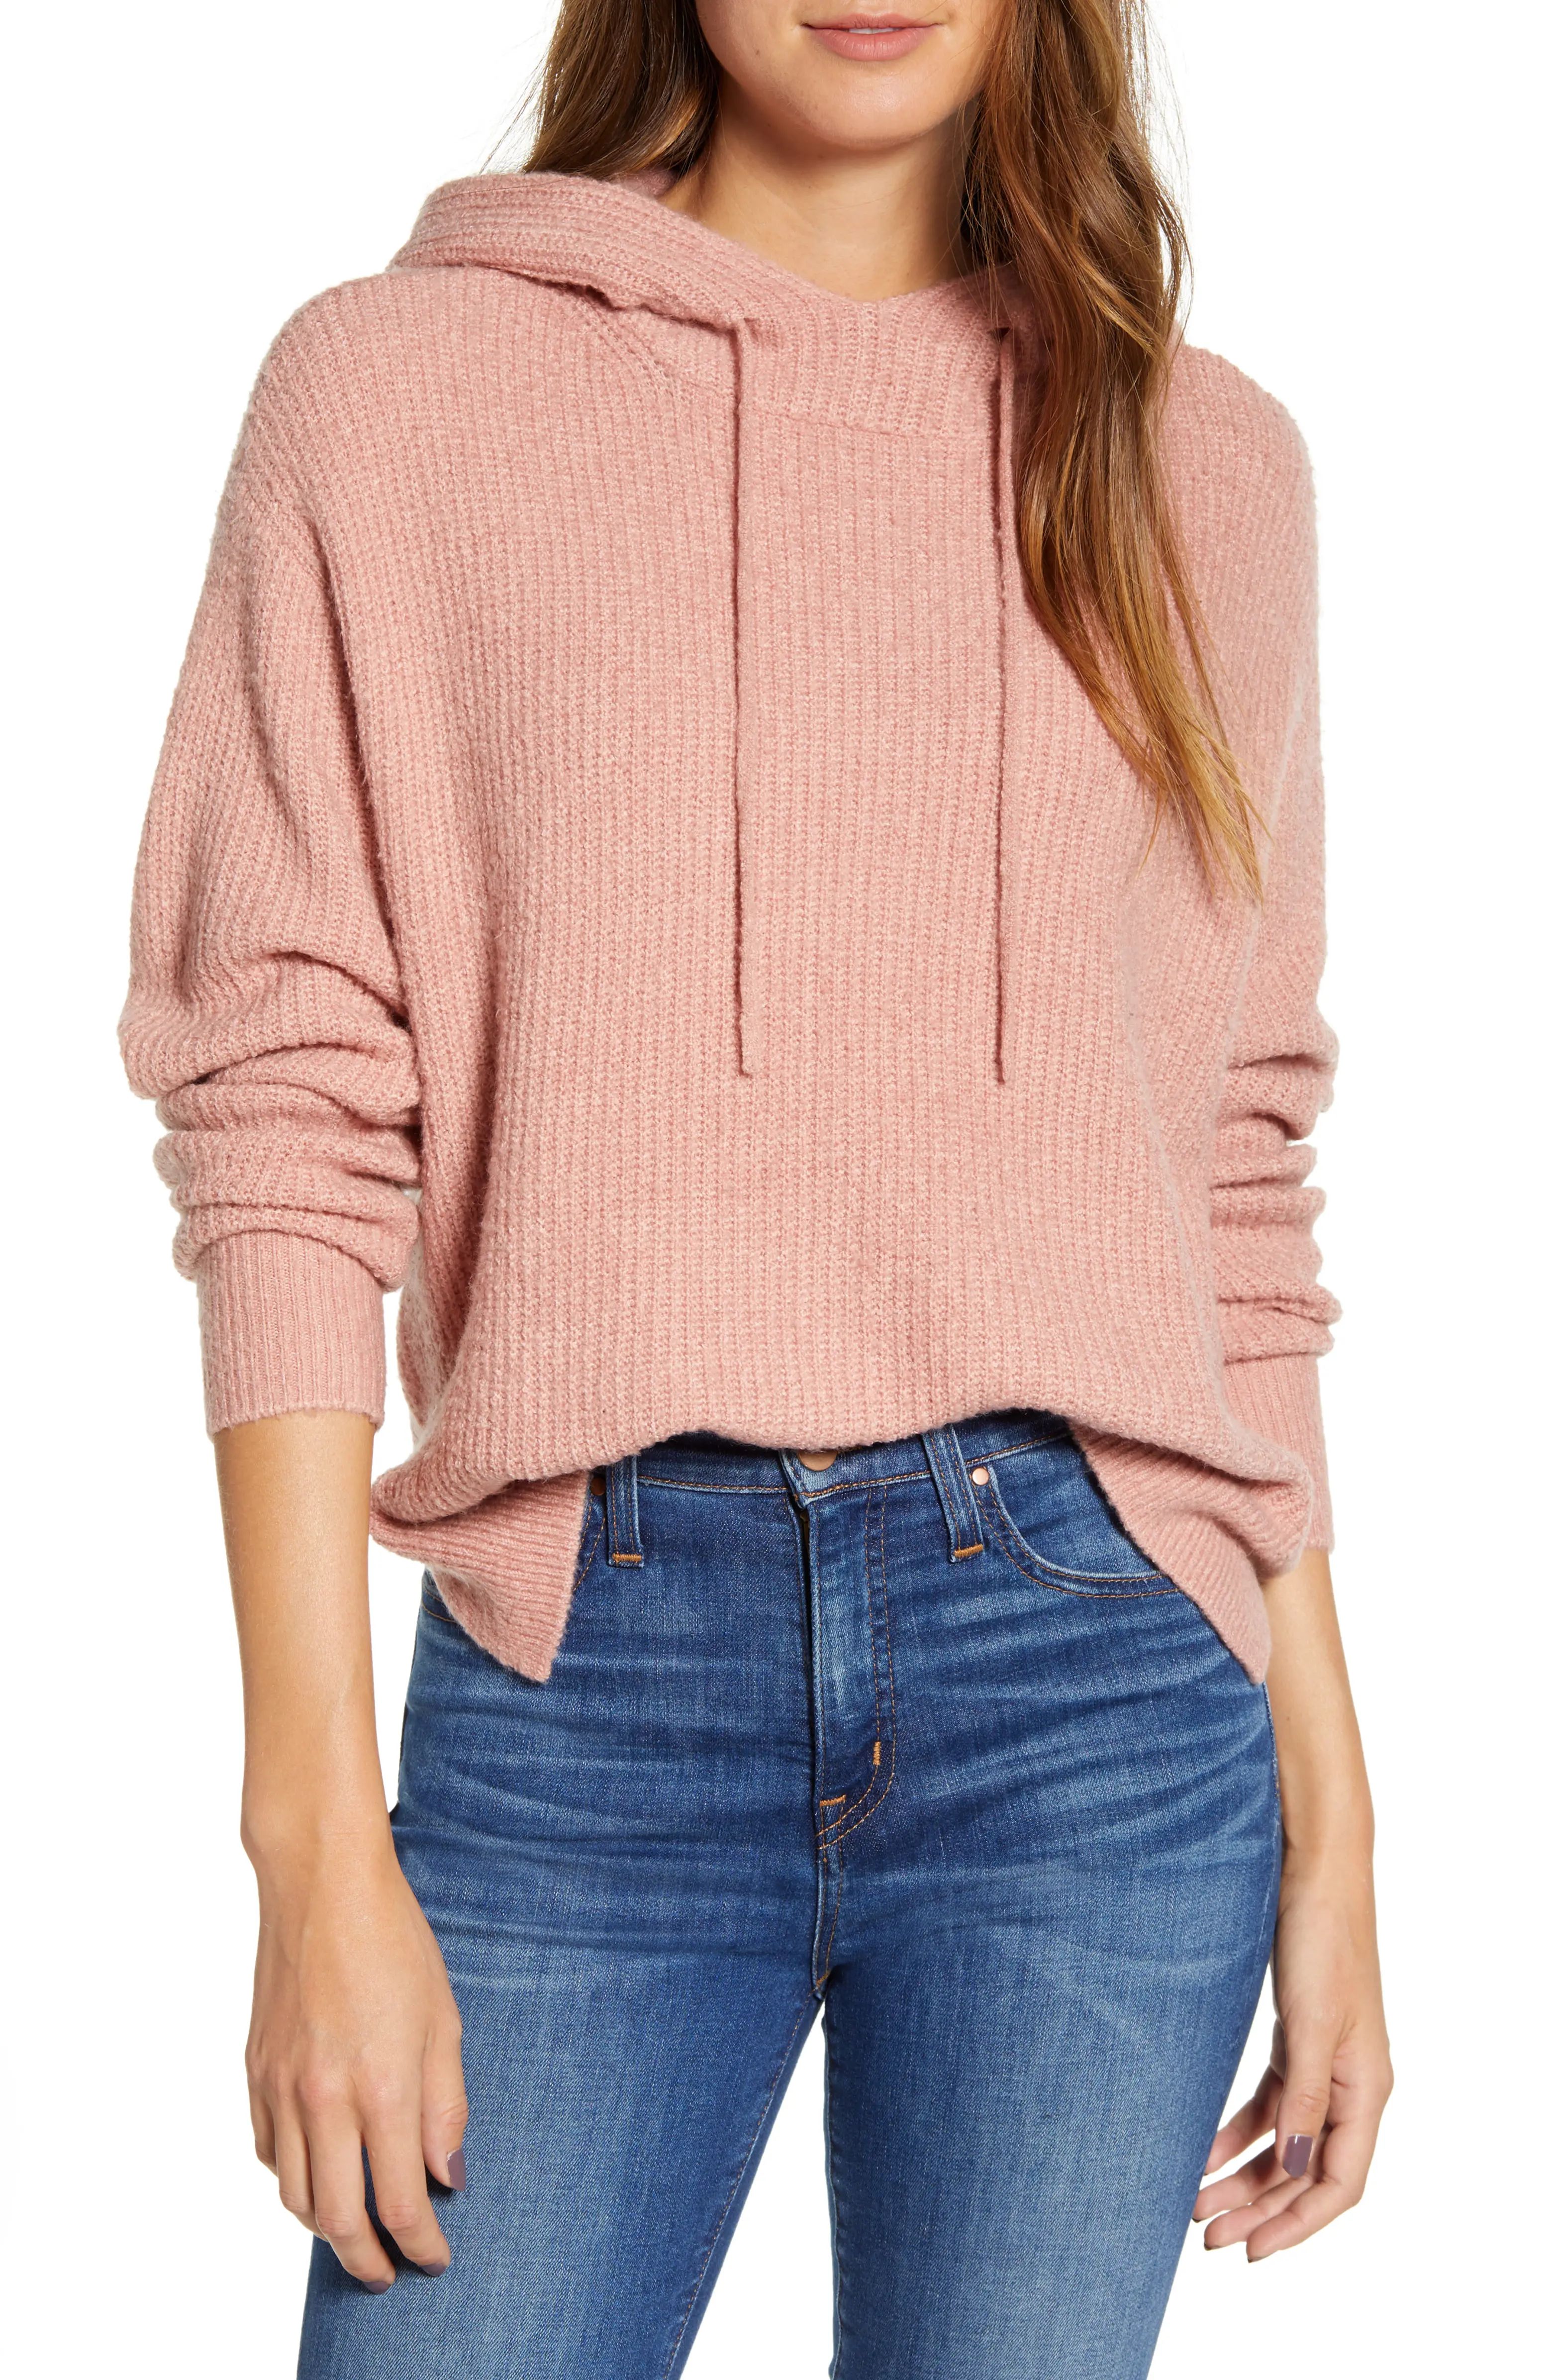 Stitchy Tunic Sweater | Nordstrom